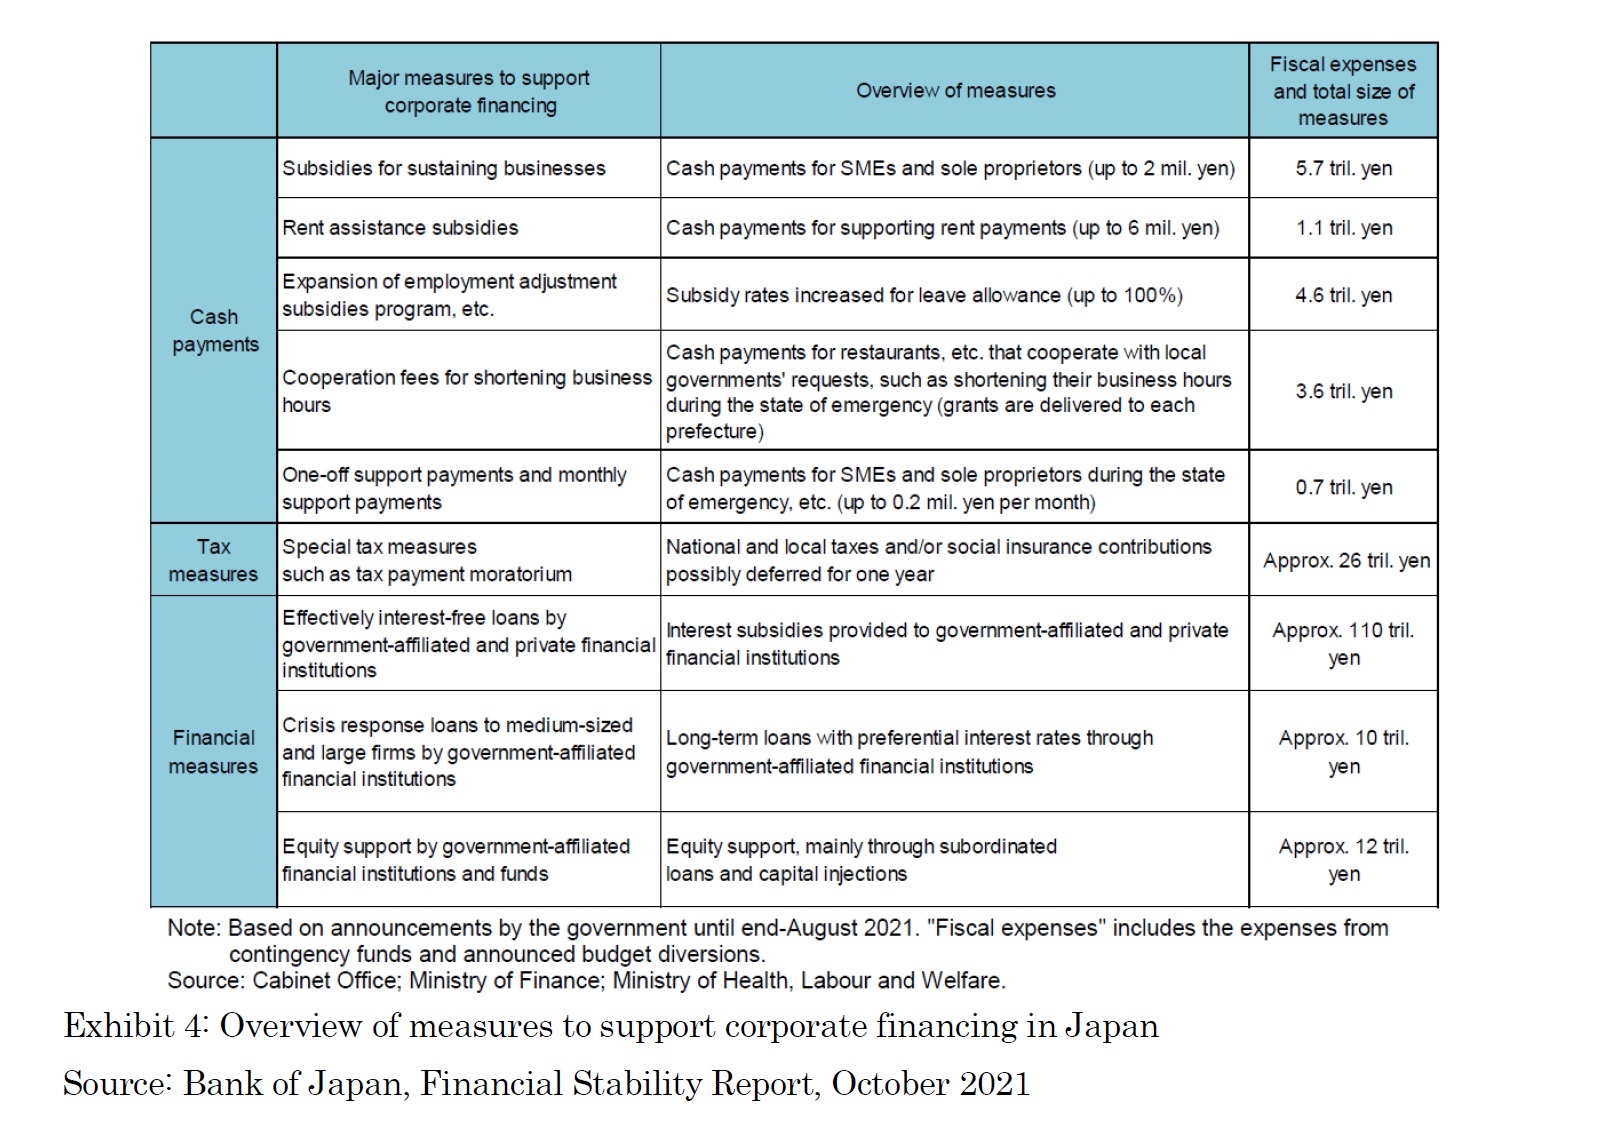 Exhibit 4: Overview of measures to support corporate financing in Japan